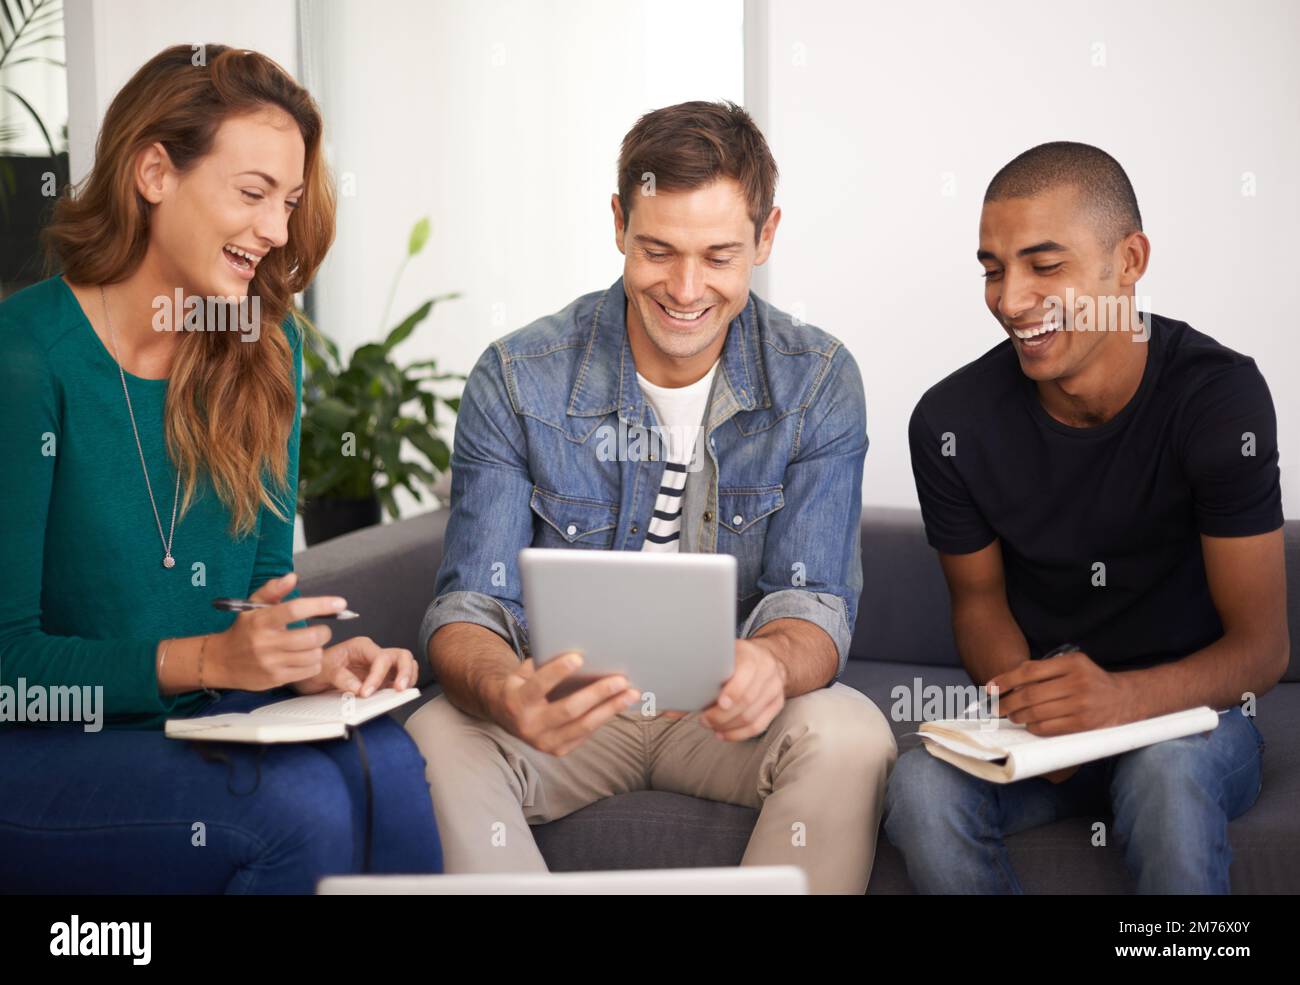 Awesome work. A team of young business professionals using technology in an informal meeting. Stock Photo